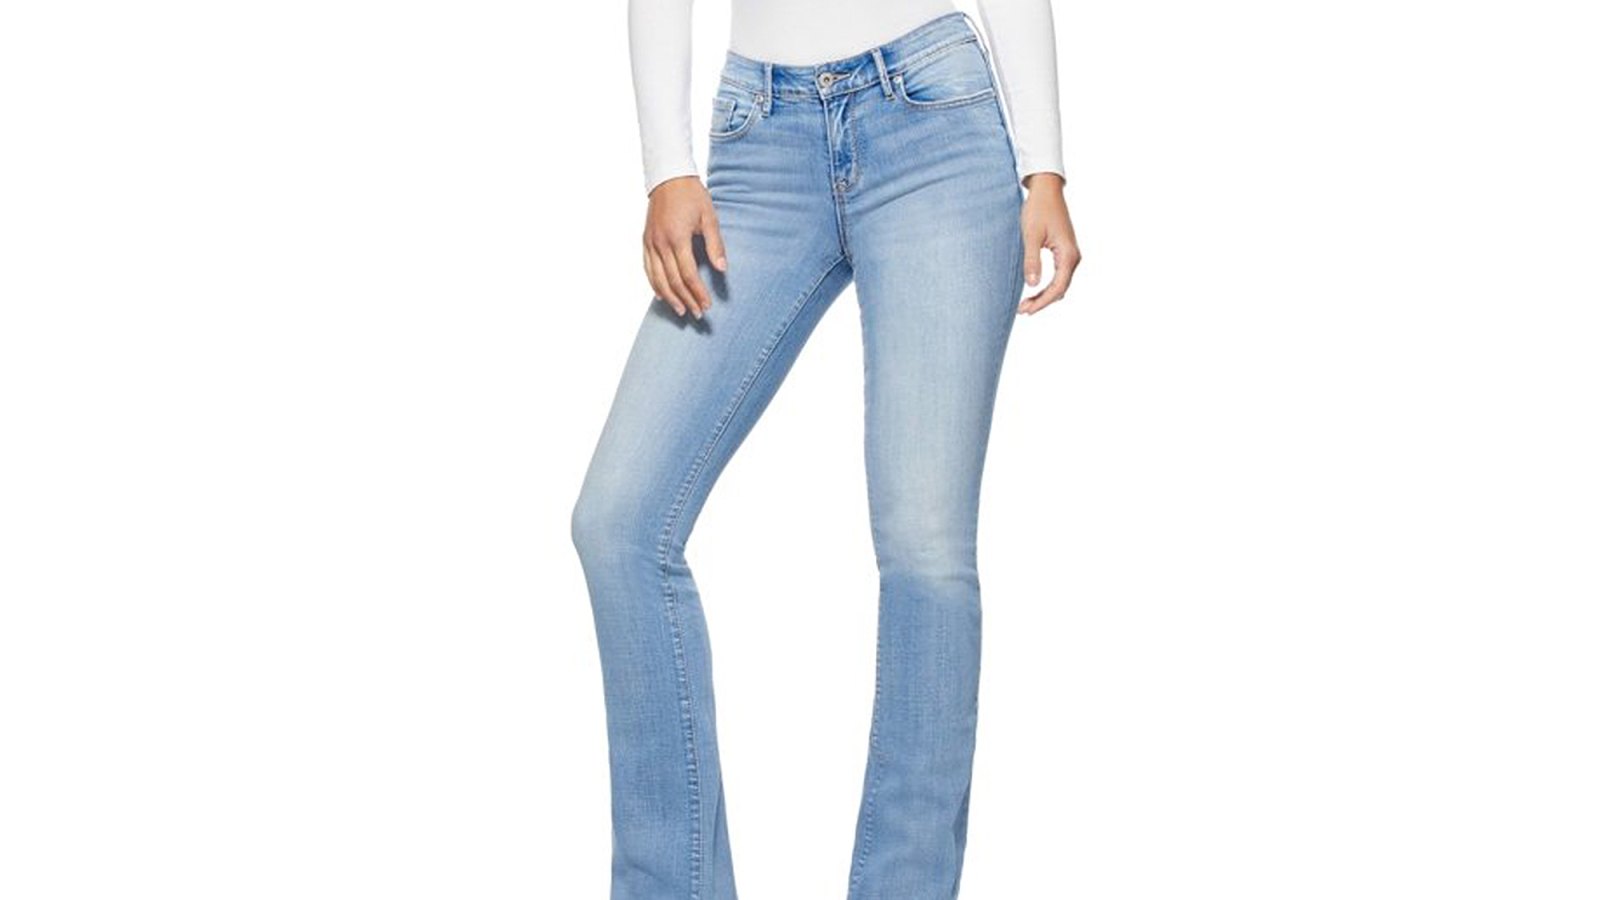 Find your perfect Bootcut jeans here